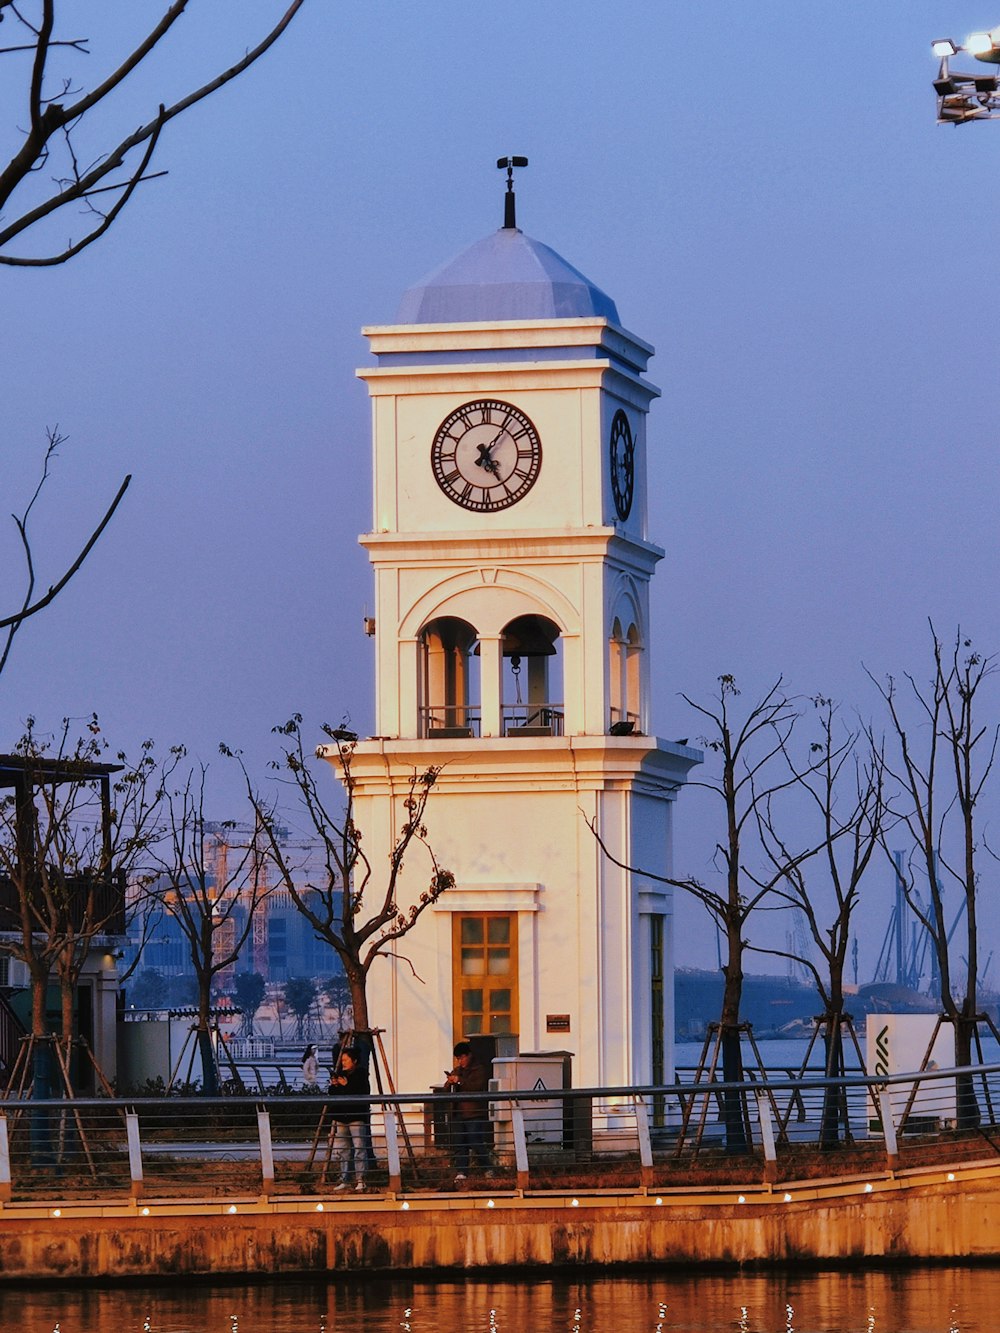 a white clock tower sitting next to a body of water